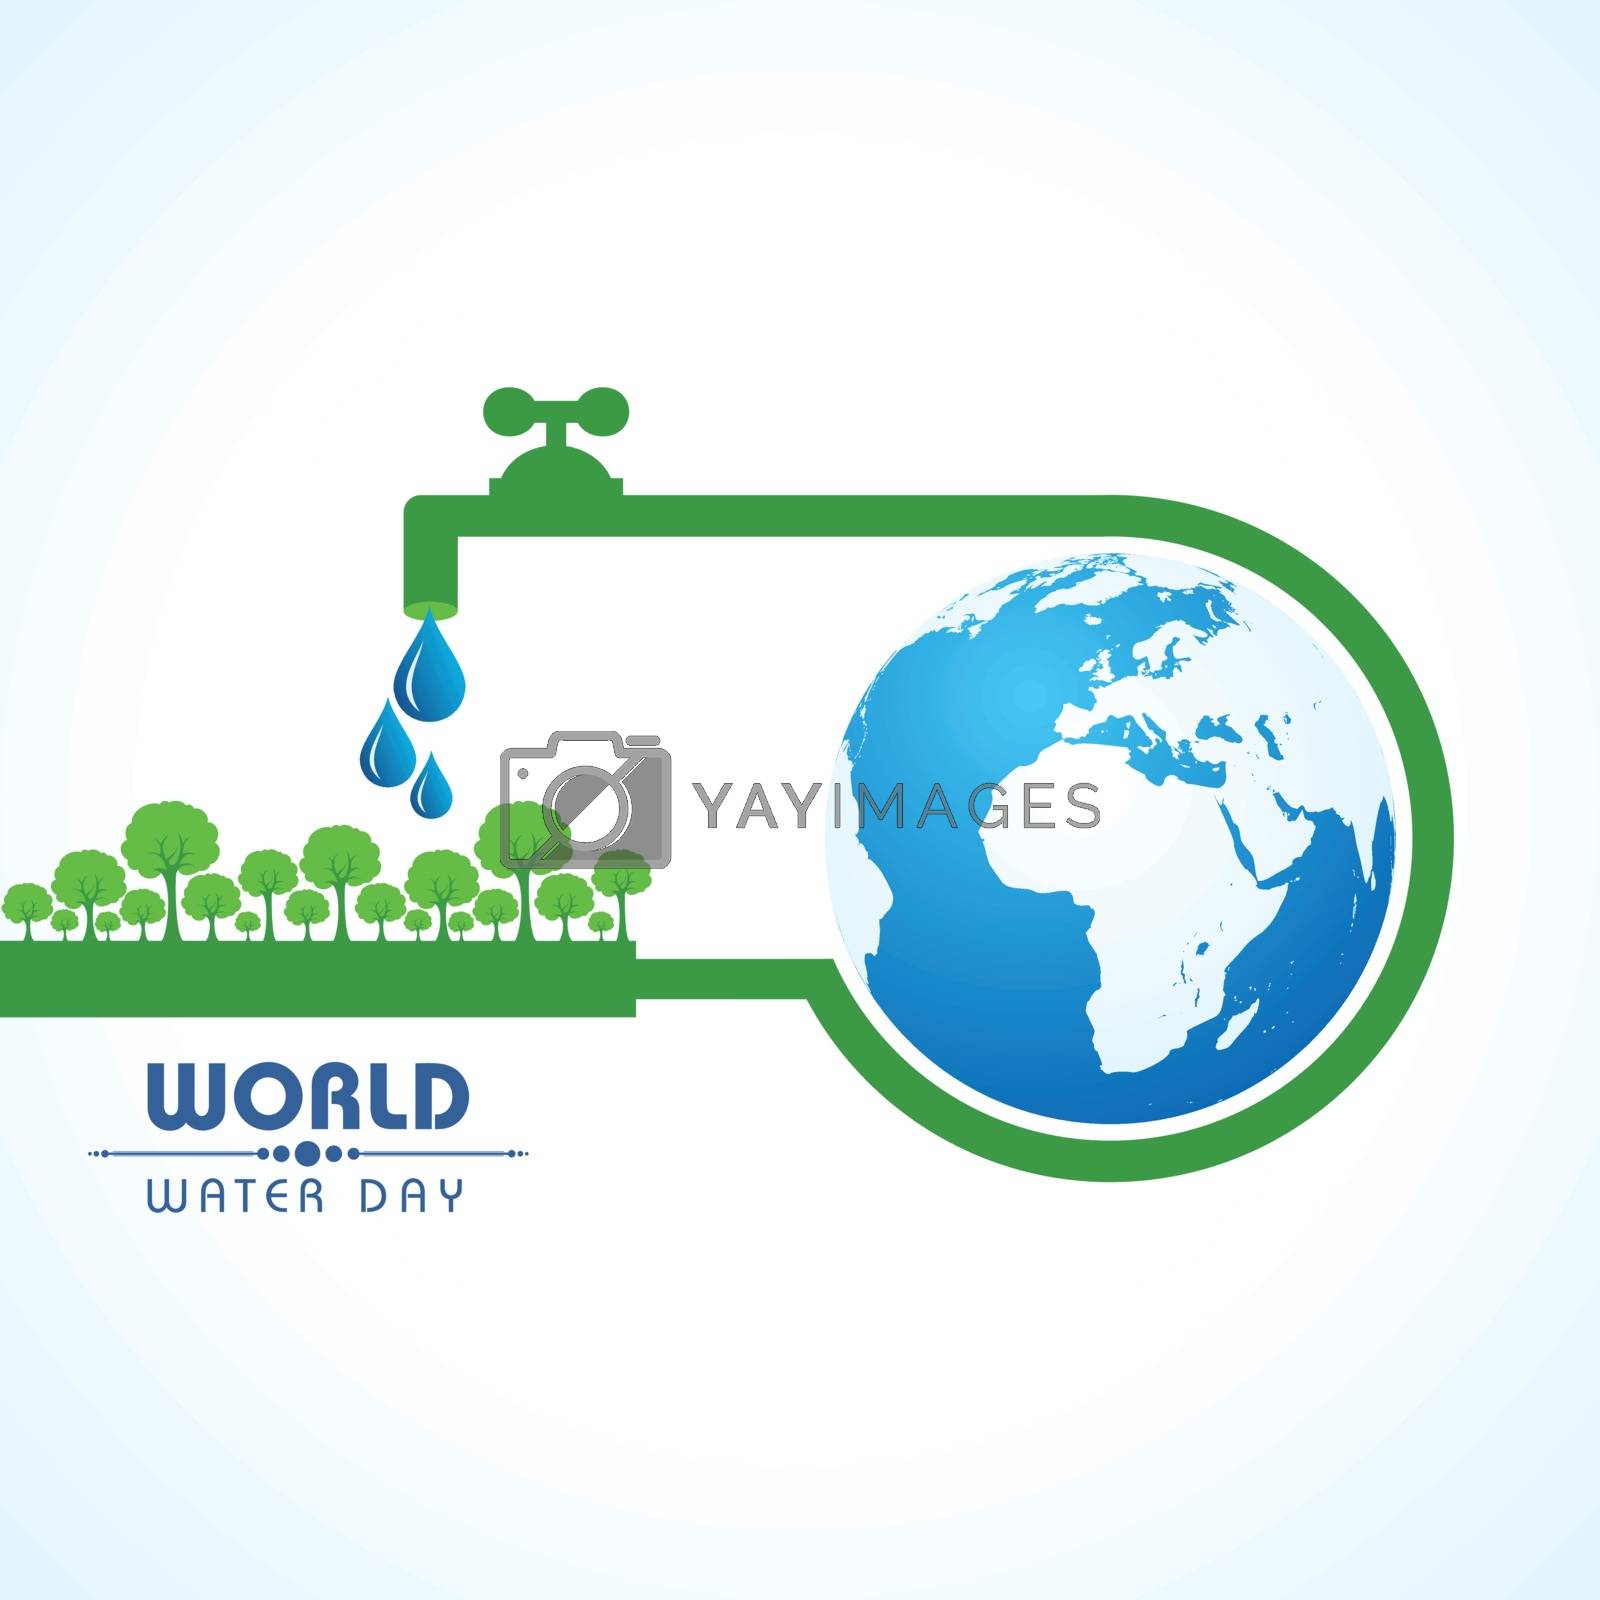 Royalty free image of Save Nature Concept - World Water Day by graphicsdunia4you